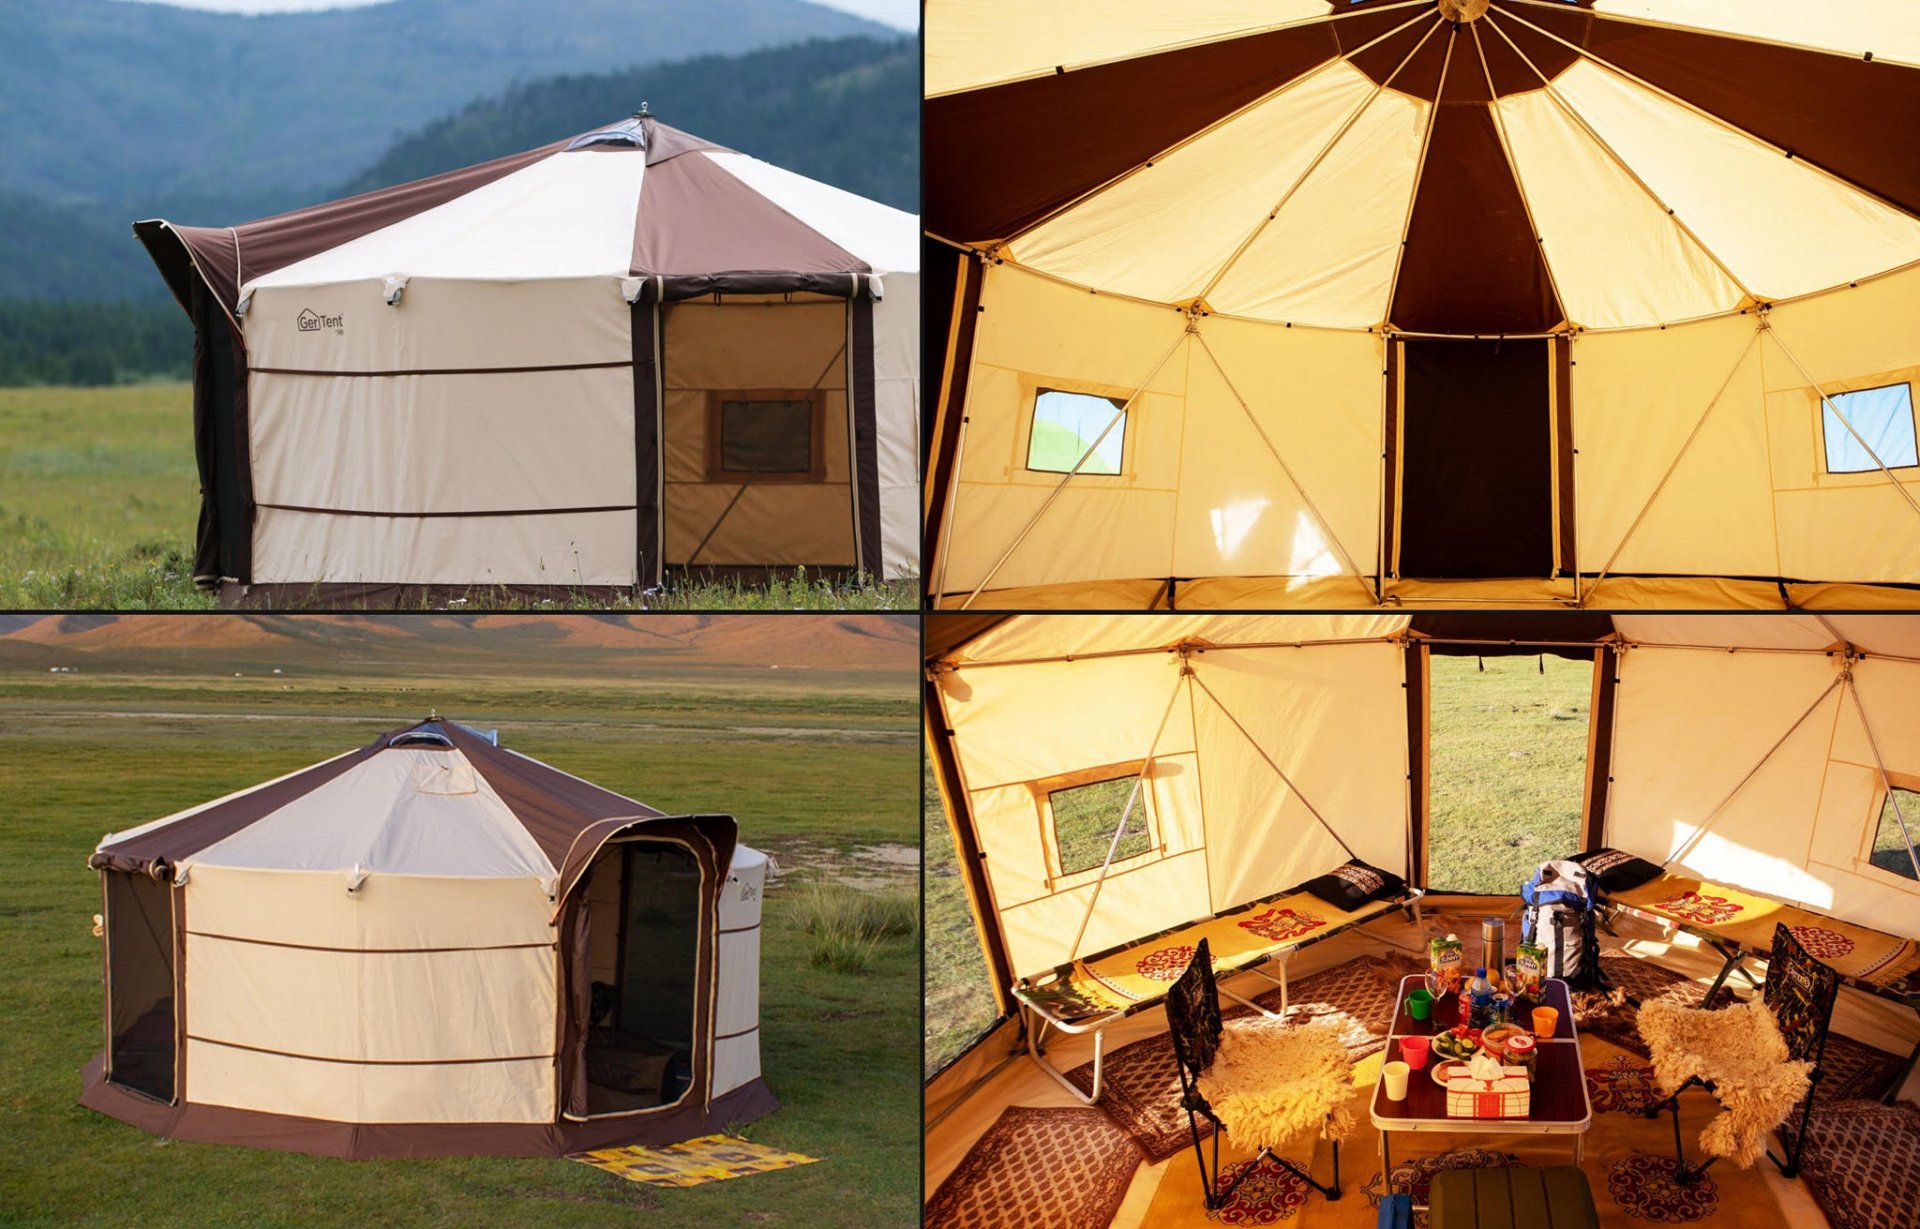 The most durable and comfortable four seasonal glamping tent